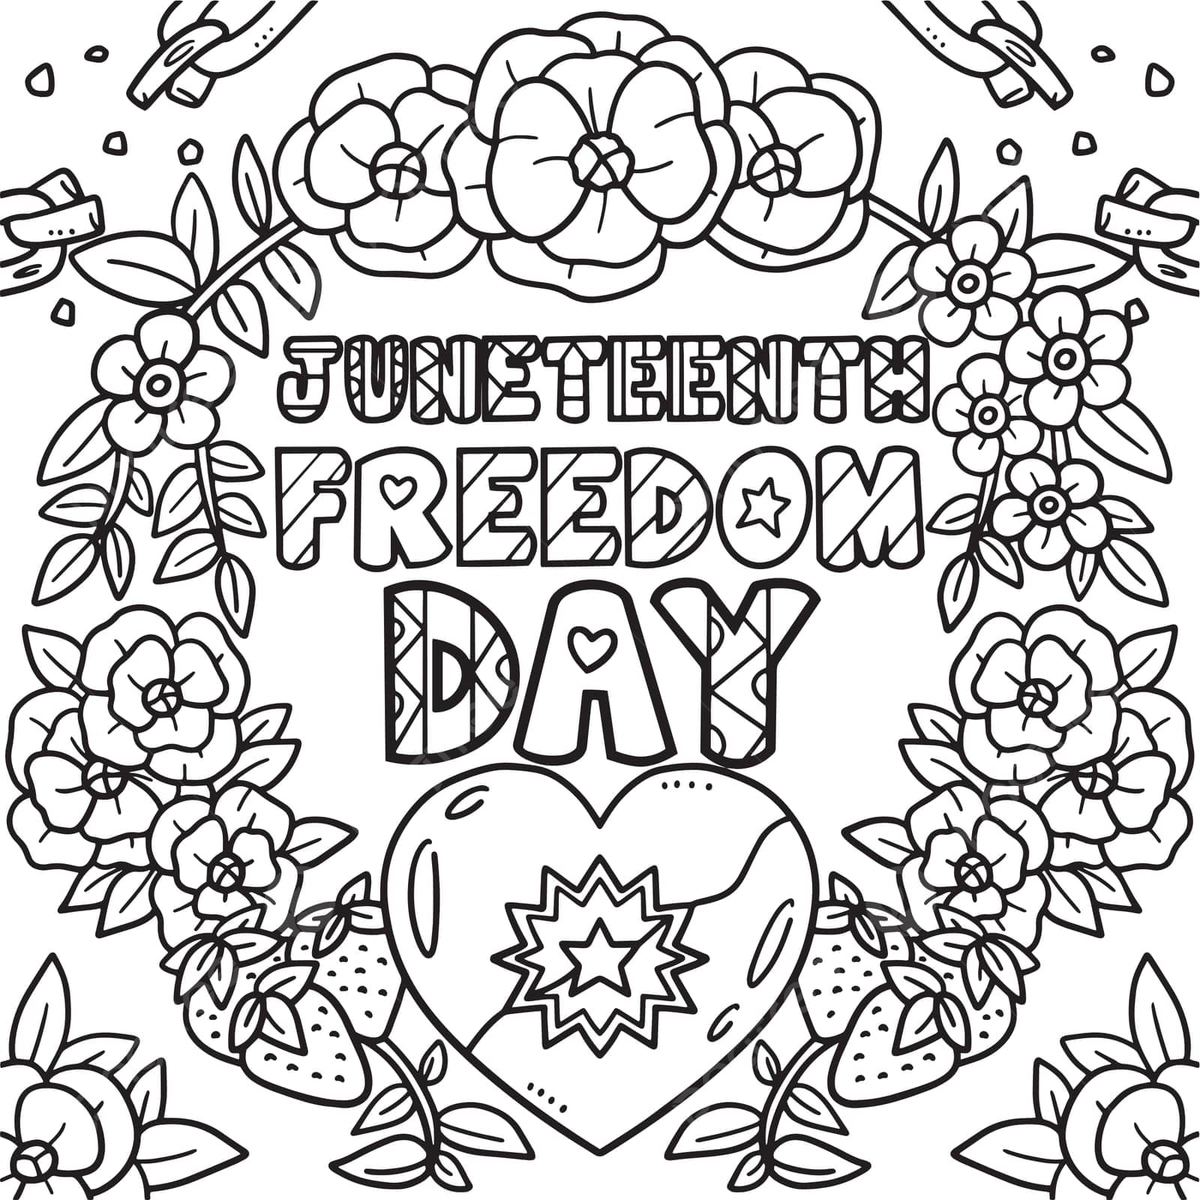 Juneteenth freedom day coloring page for kids kids coloring celebration vector rat drawing ring drawing kid drawing png and vector with transparent background for free download